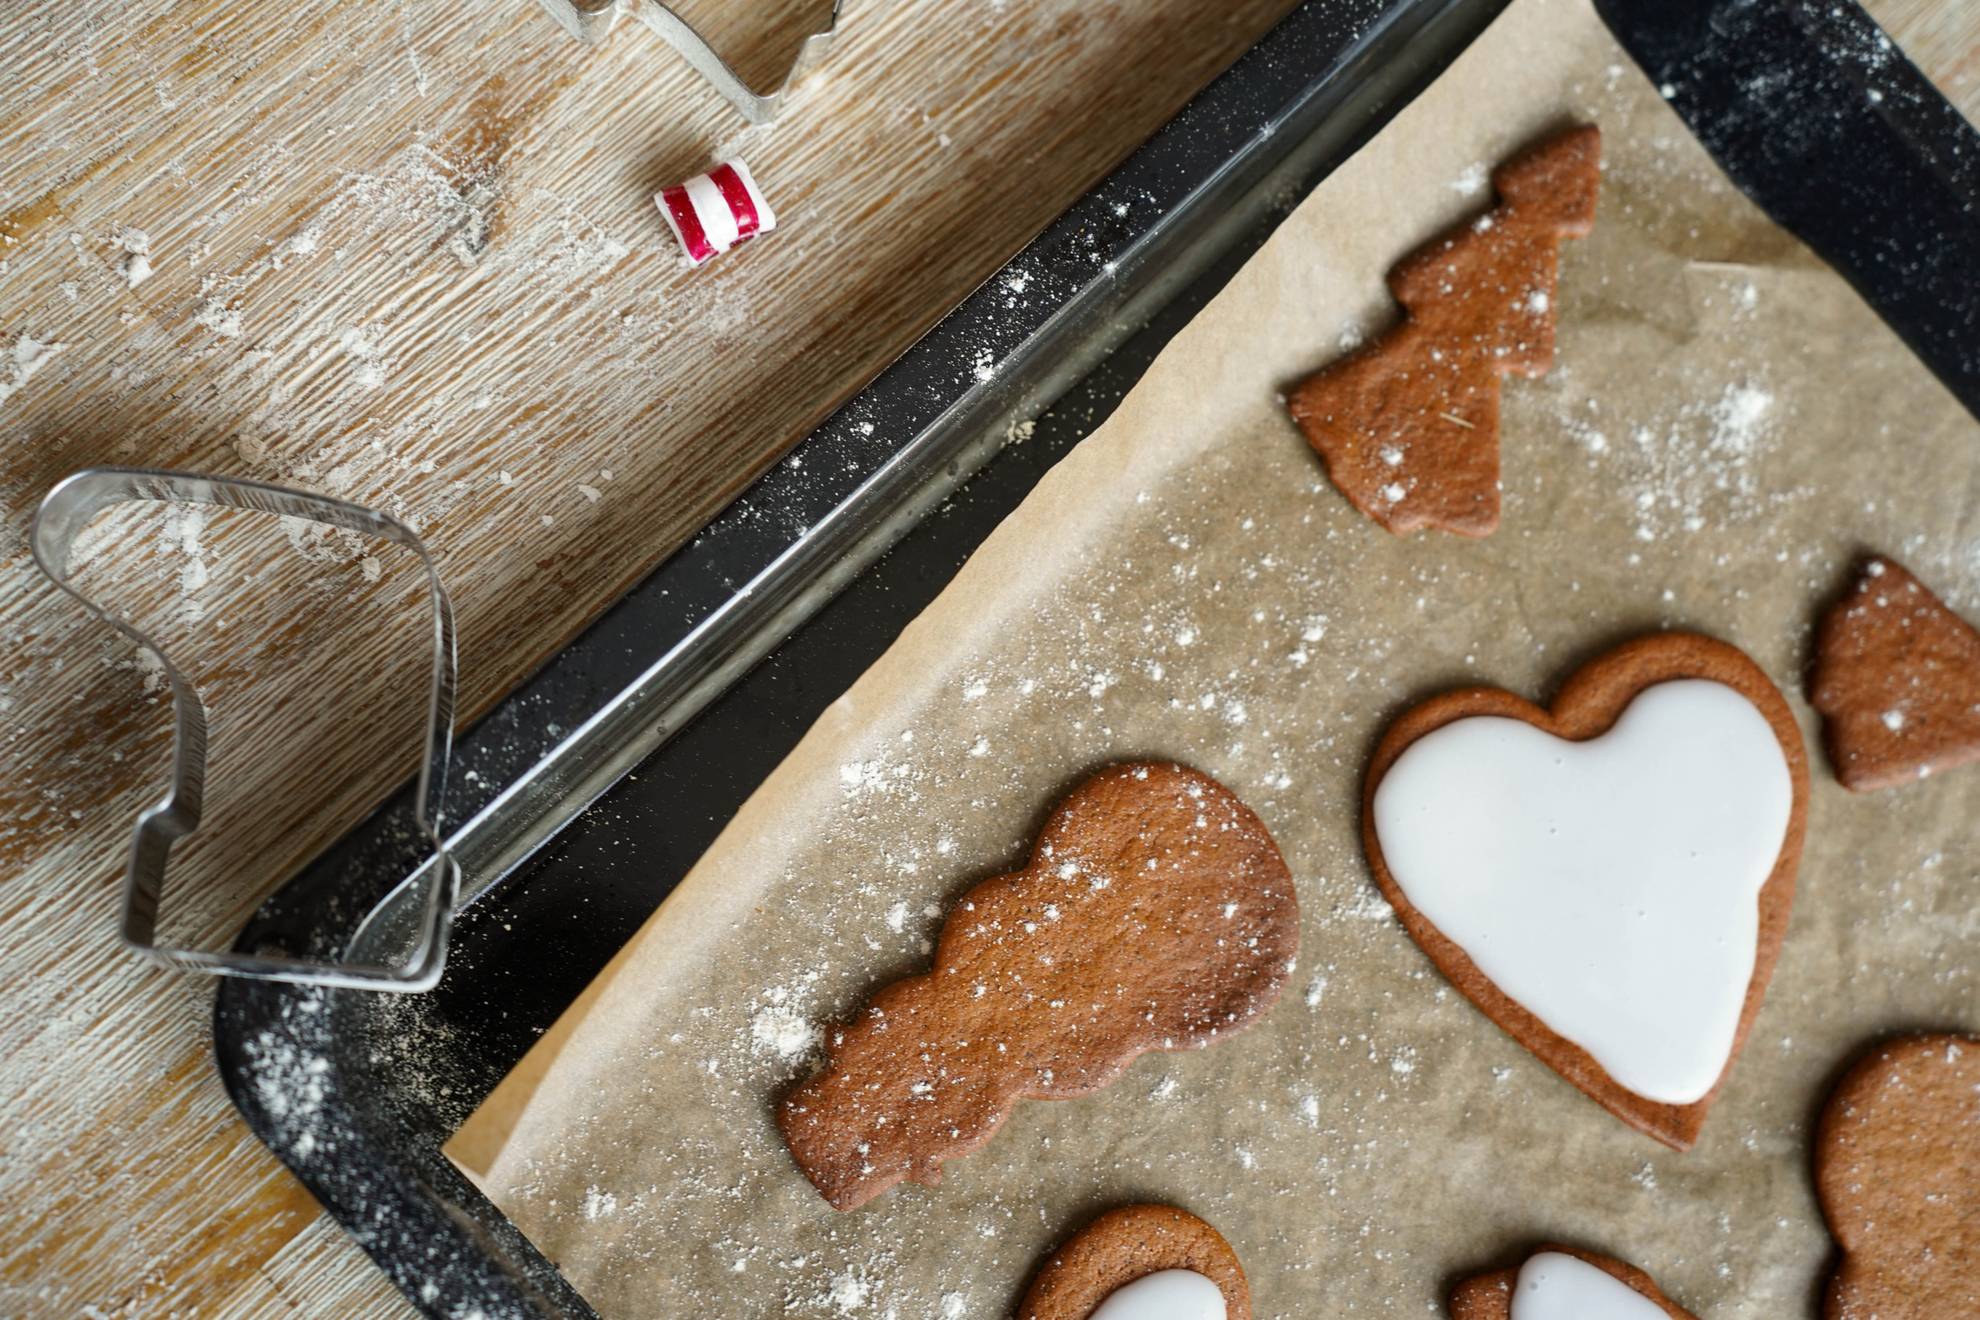 A baking tray with freshly made gingerbread biscuits.